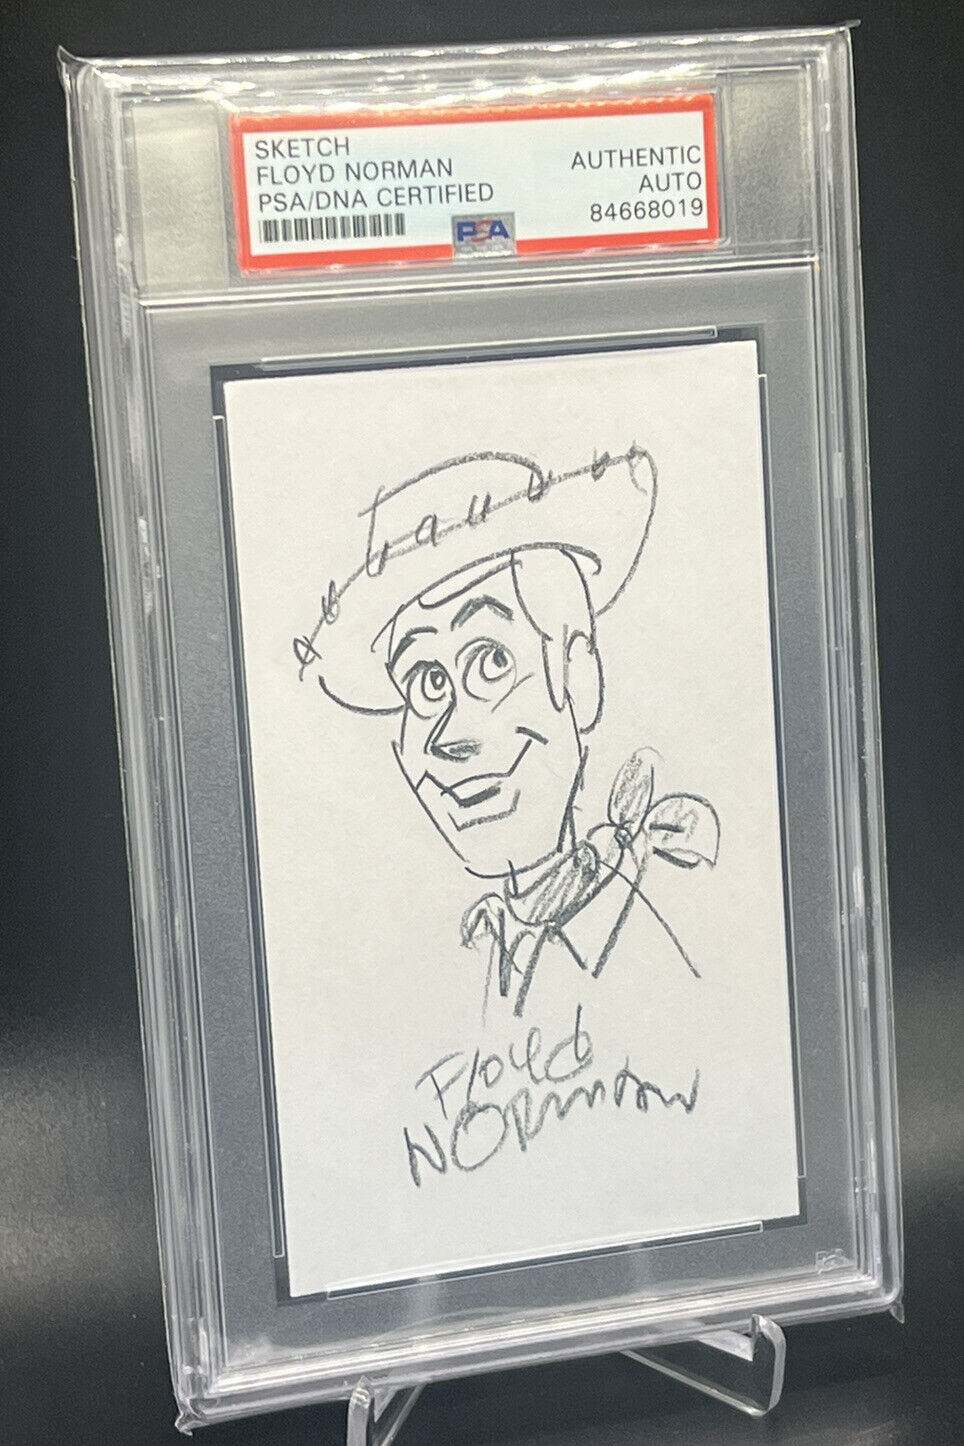 FLOYD NORMAN DISNEY PSA Authenticated Autographed Signed Sketch Woody Toy Story